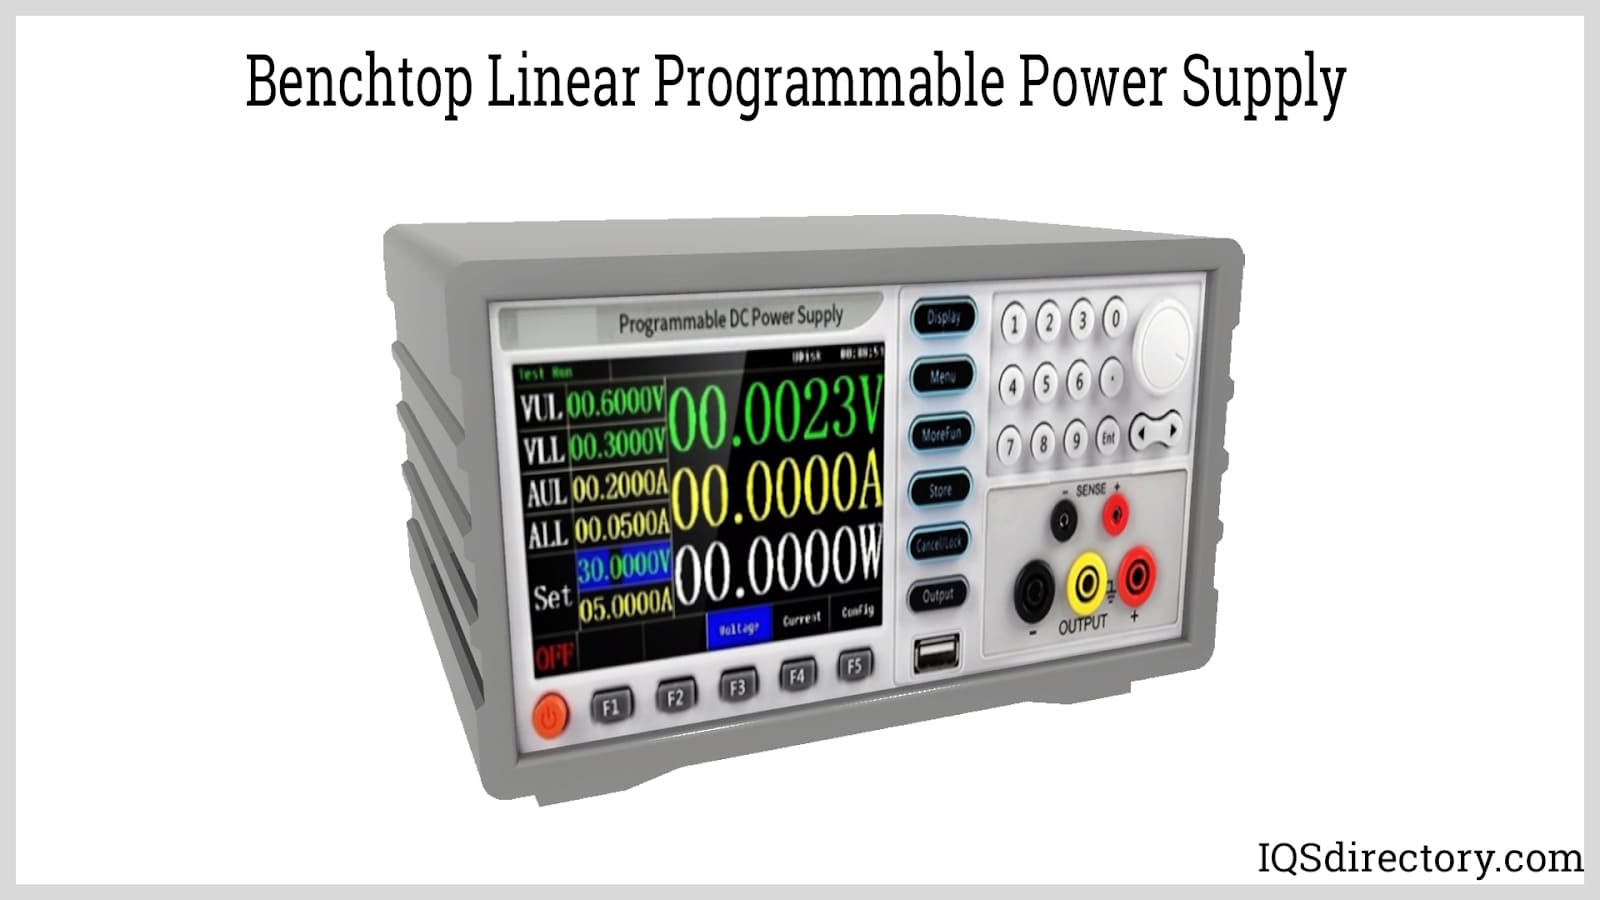 Benchtop Linear Programmable Power Supply